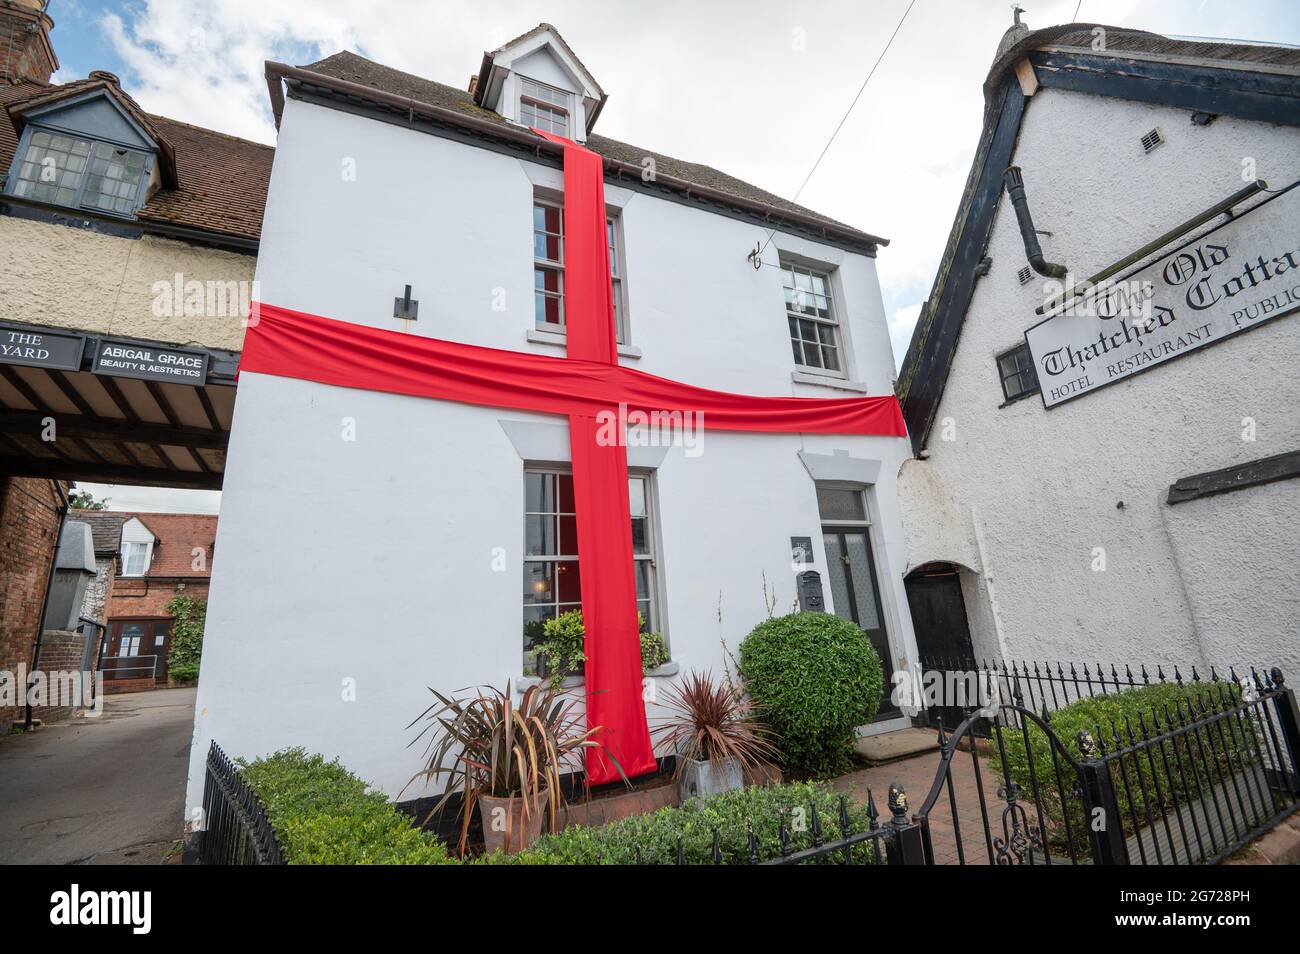 Warwickshire, UK. 10th July, 2021. July 10th, 2021, a house in Dunchurch, Warwickshire dressed in red ribbon for the Euro 2020 final in a St George's cross. Credit: Jamie Gray/Alamy Live News Stock Photo